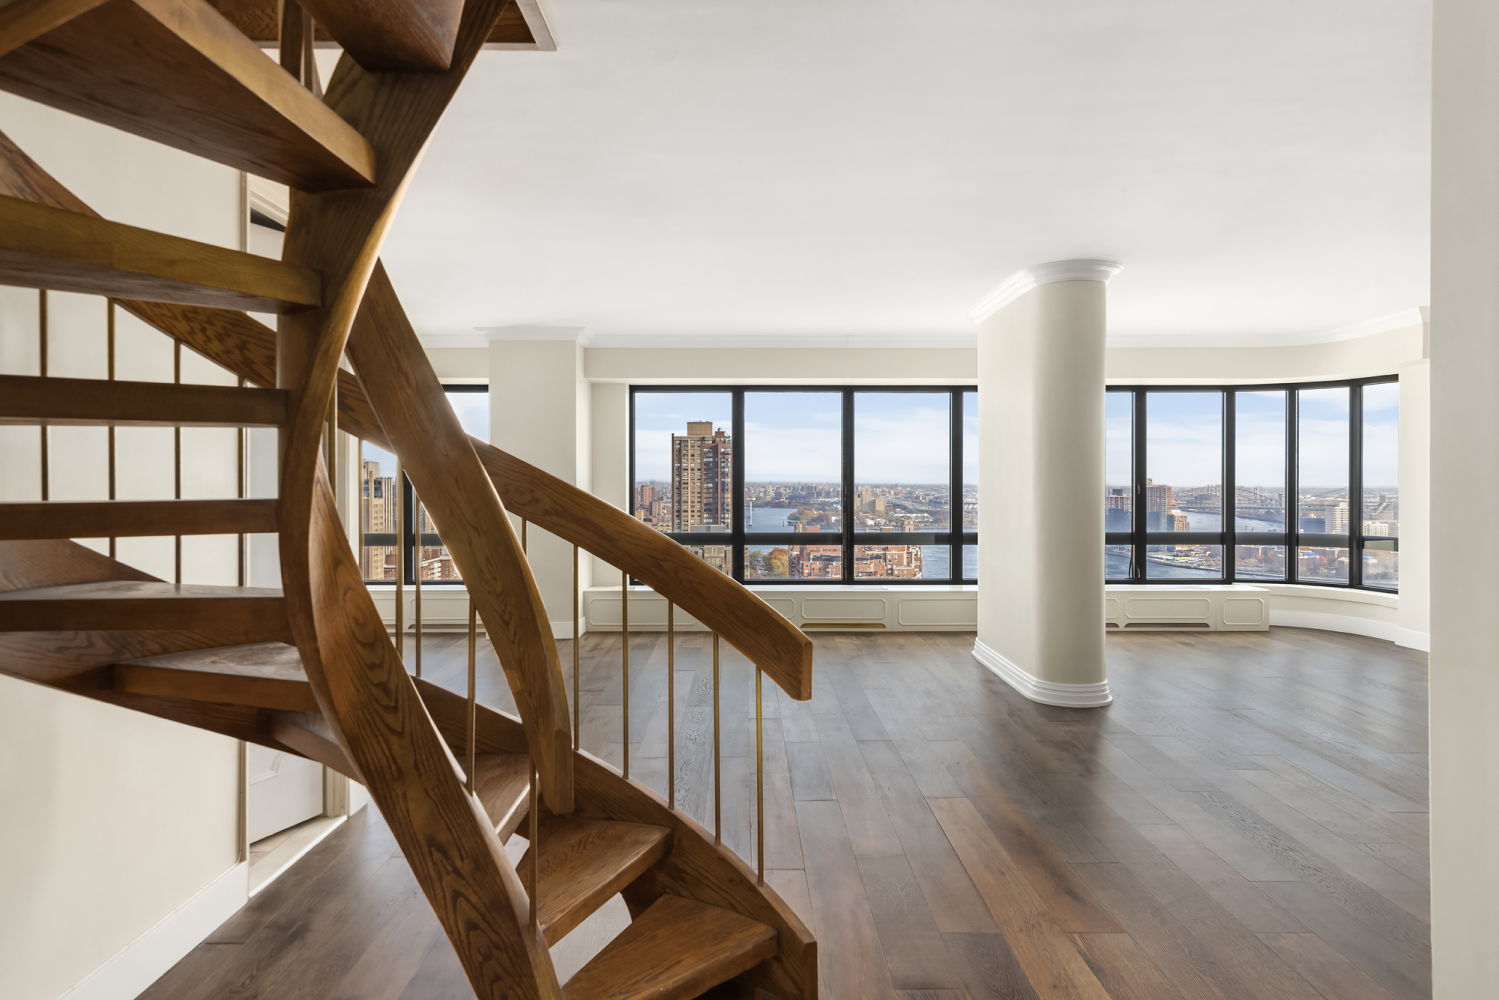 530 East 76th Street Ph3637e, Lenox Hill, Upper East Side, NYC - 4 Bedrooms  
4.5 Bathrooms  
8 Rooms - 